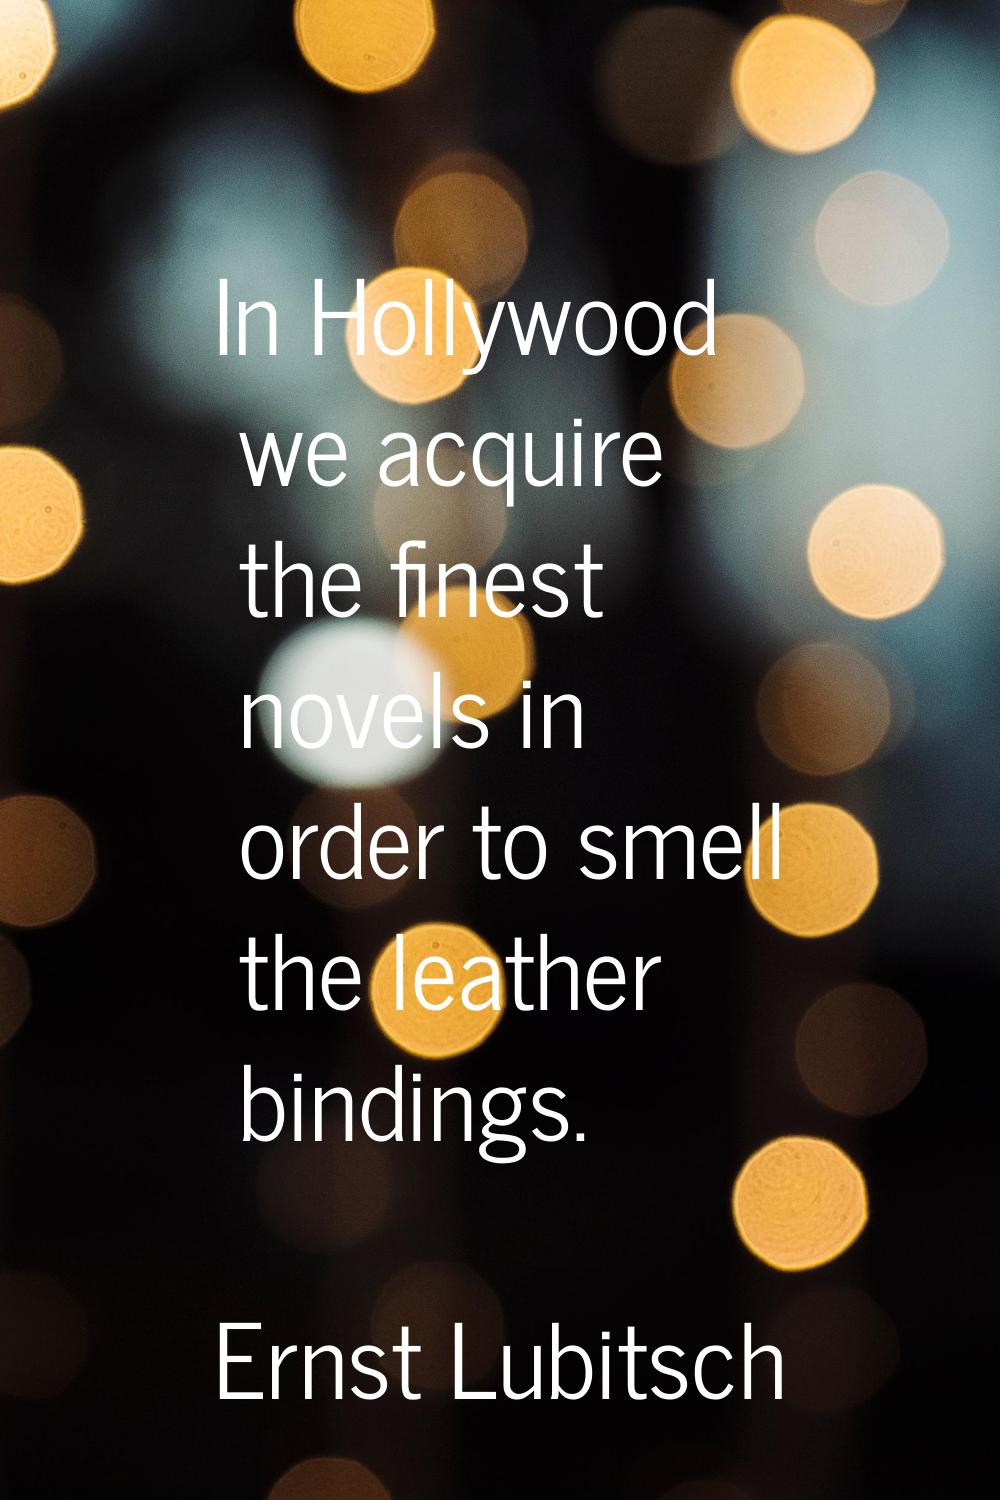 In Hollywood we acquire the finest novels in order to smell the leather bindings.